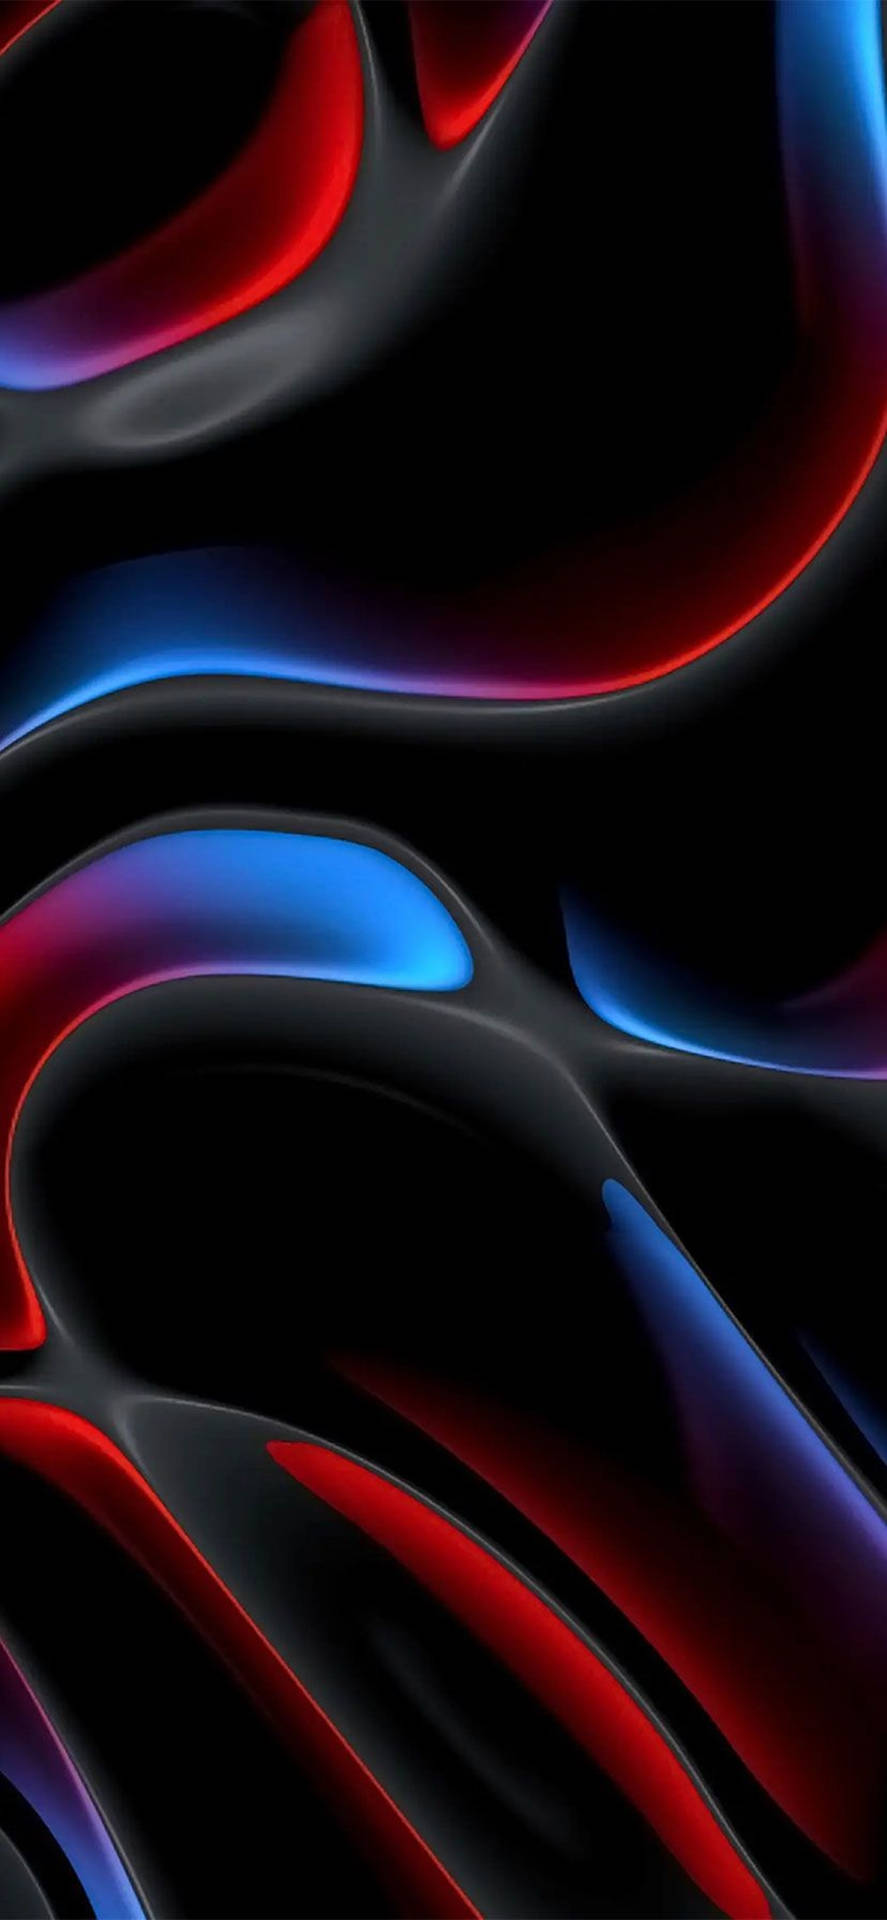 Artistic Blue-red-black Blob Pattern On Cool Iphone 11 Background